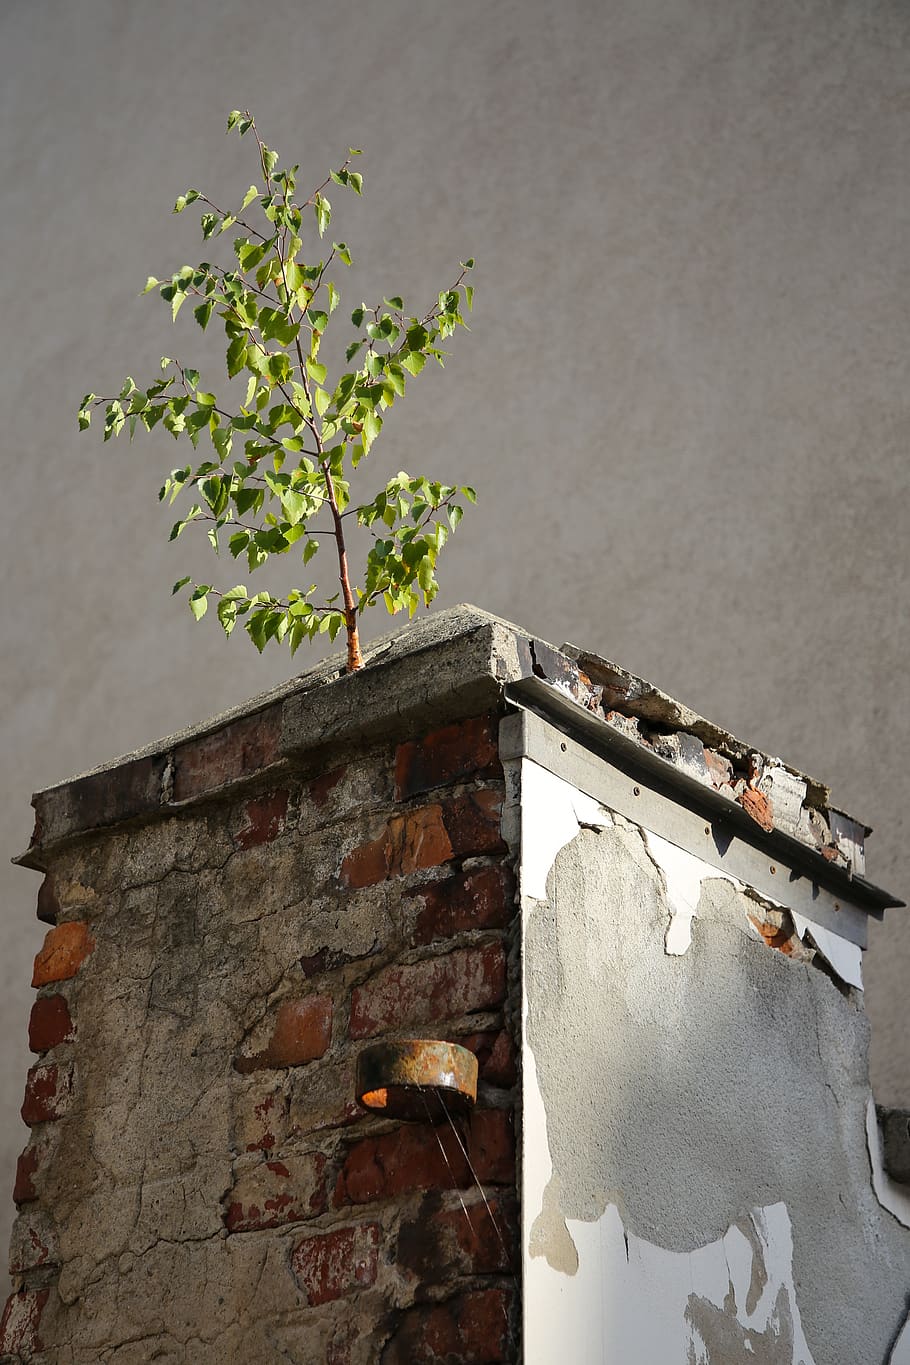 decay, ruin, masonry, ailing, dilapidated, building damage, plant, nature, built structure, wall - building feature Pxfuel